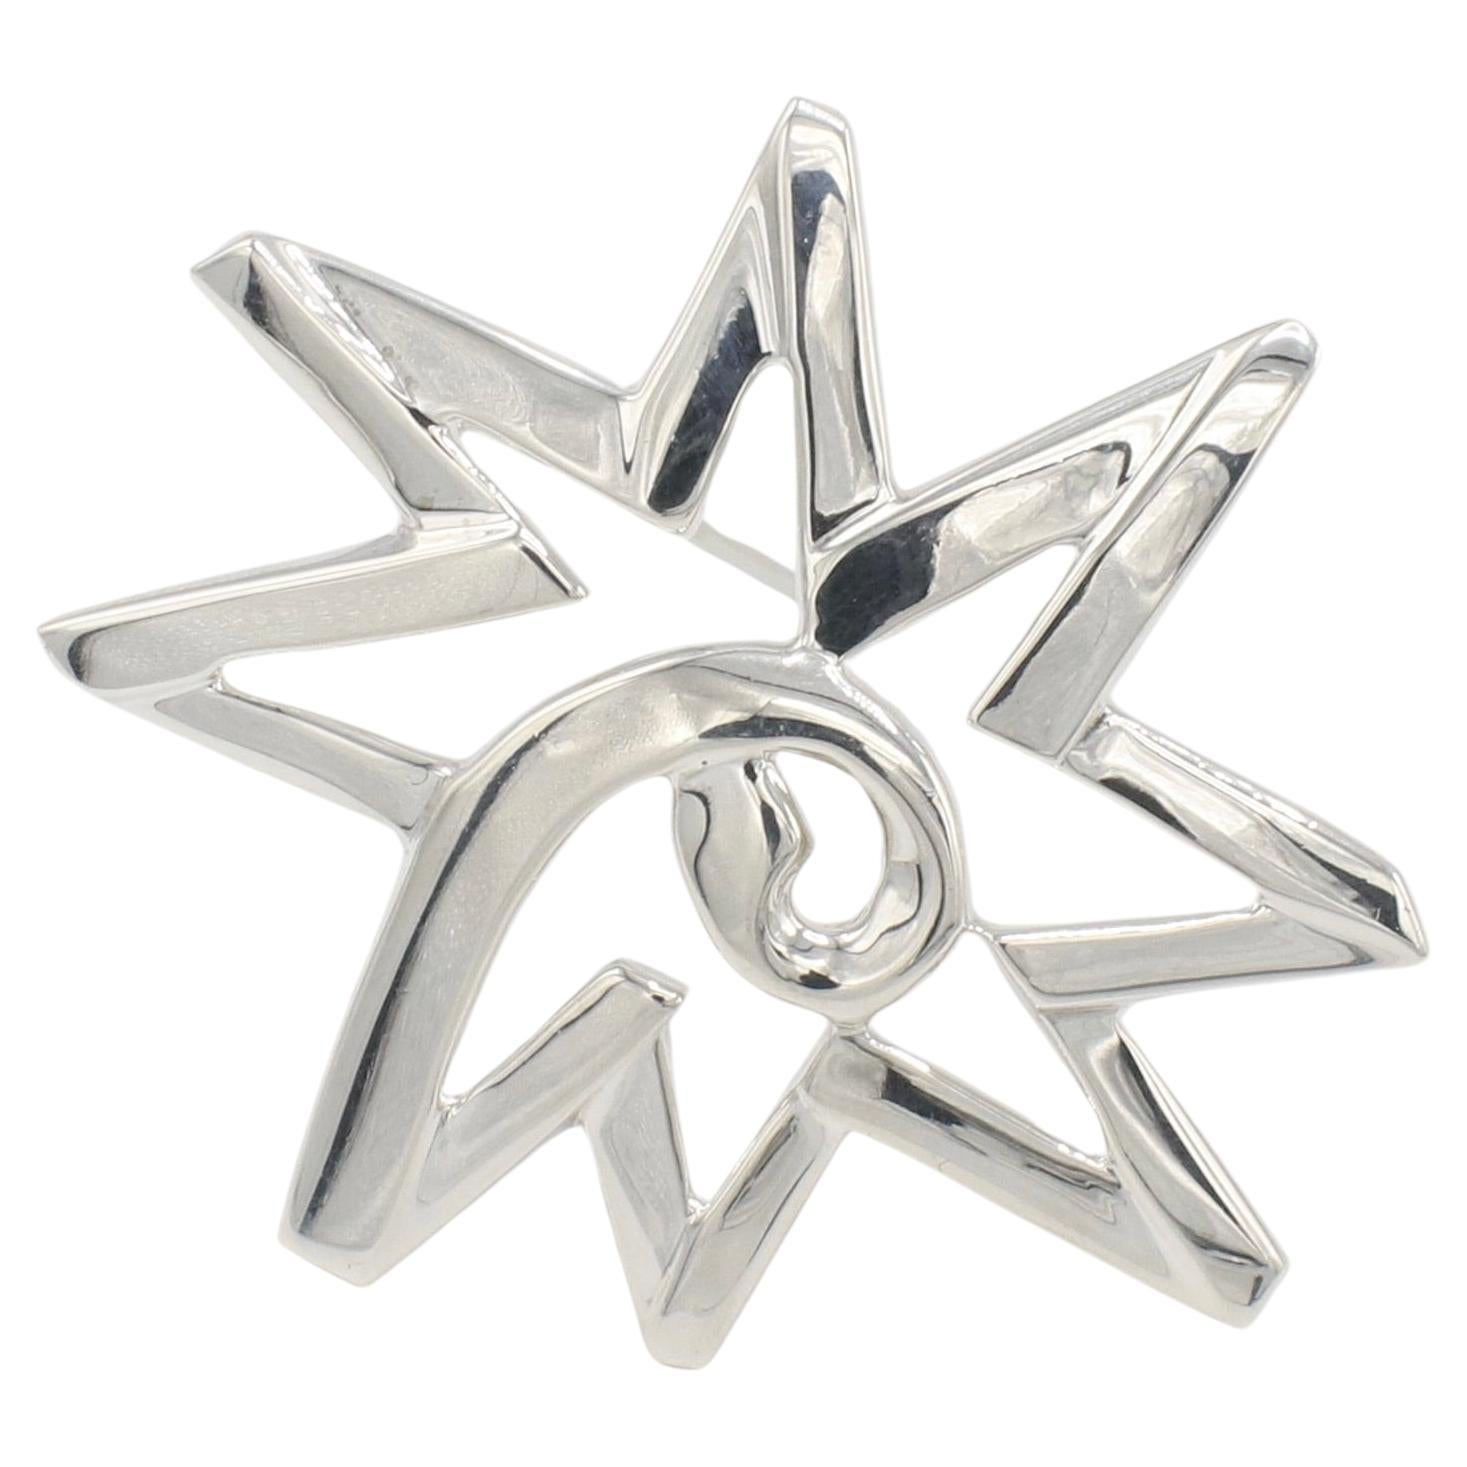 Tiffany & Co. Paloma Picasso Sterling Silver Star Pin Brooch 
Metal: 10.2 grams
Dimensions: 40 x 44mm
Signed: ©Tiffany & Co. Paloma Picasso 925
